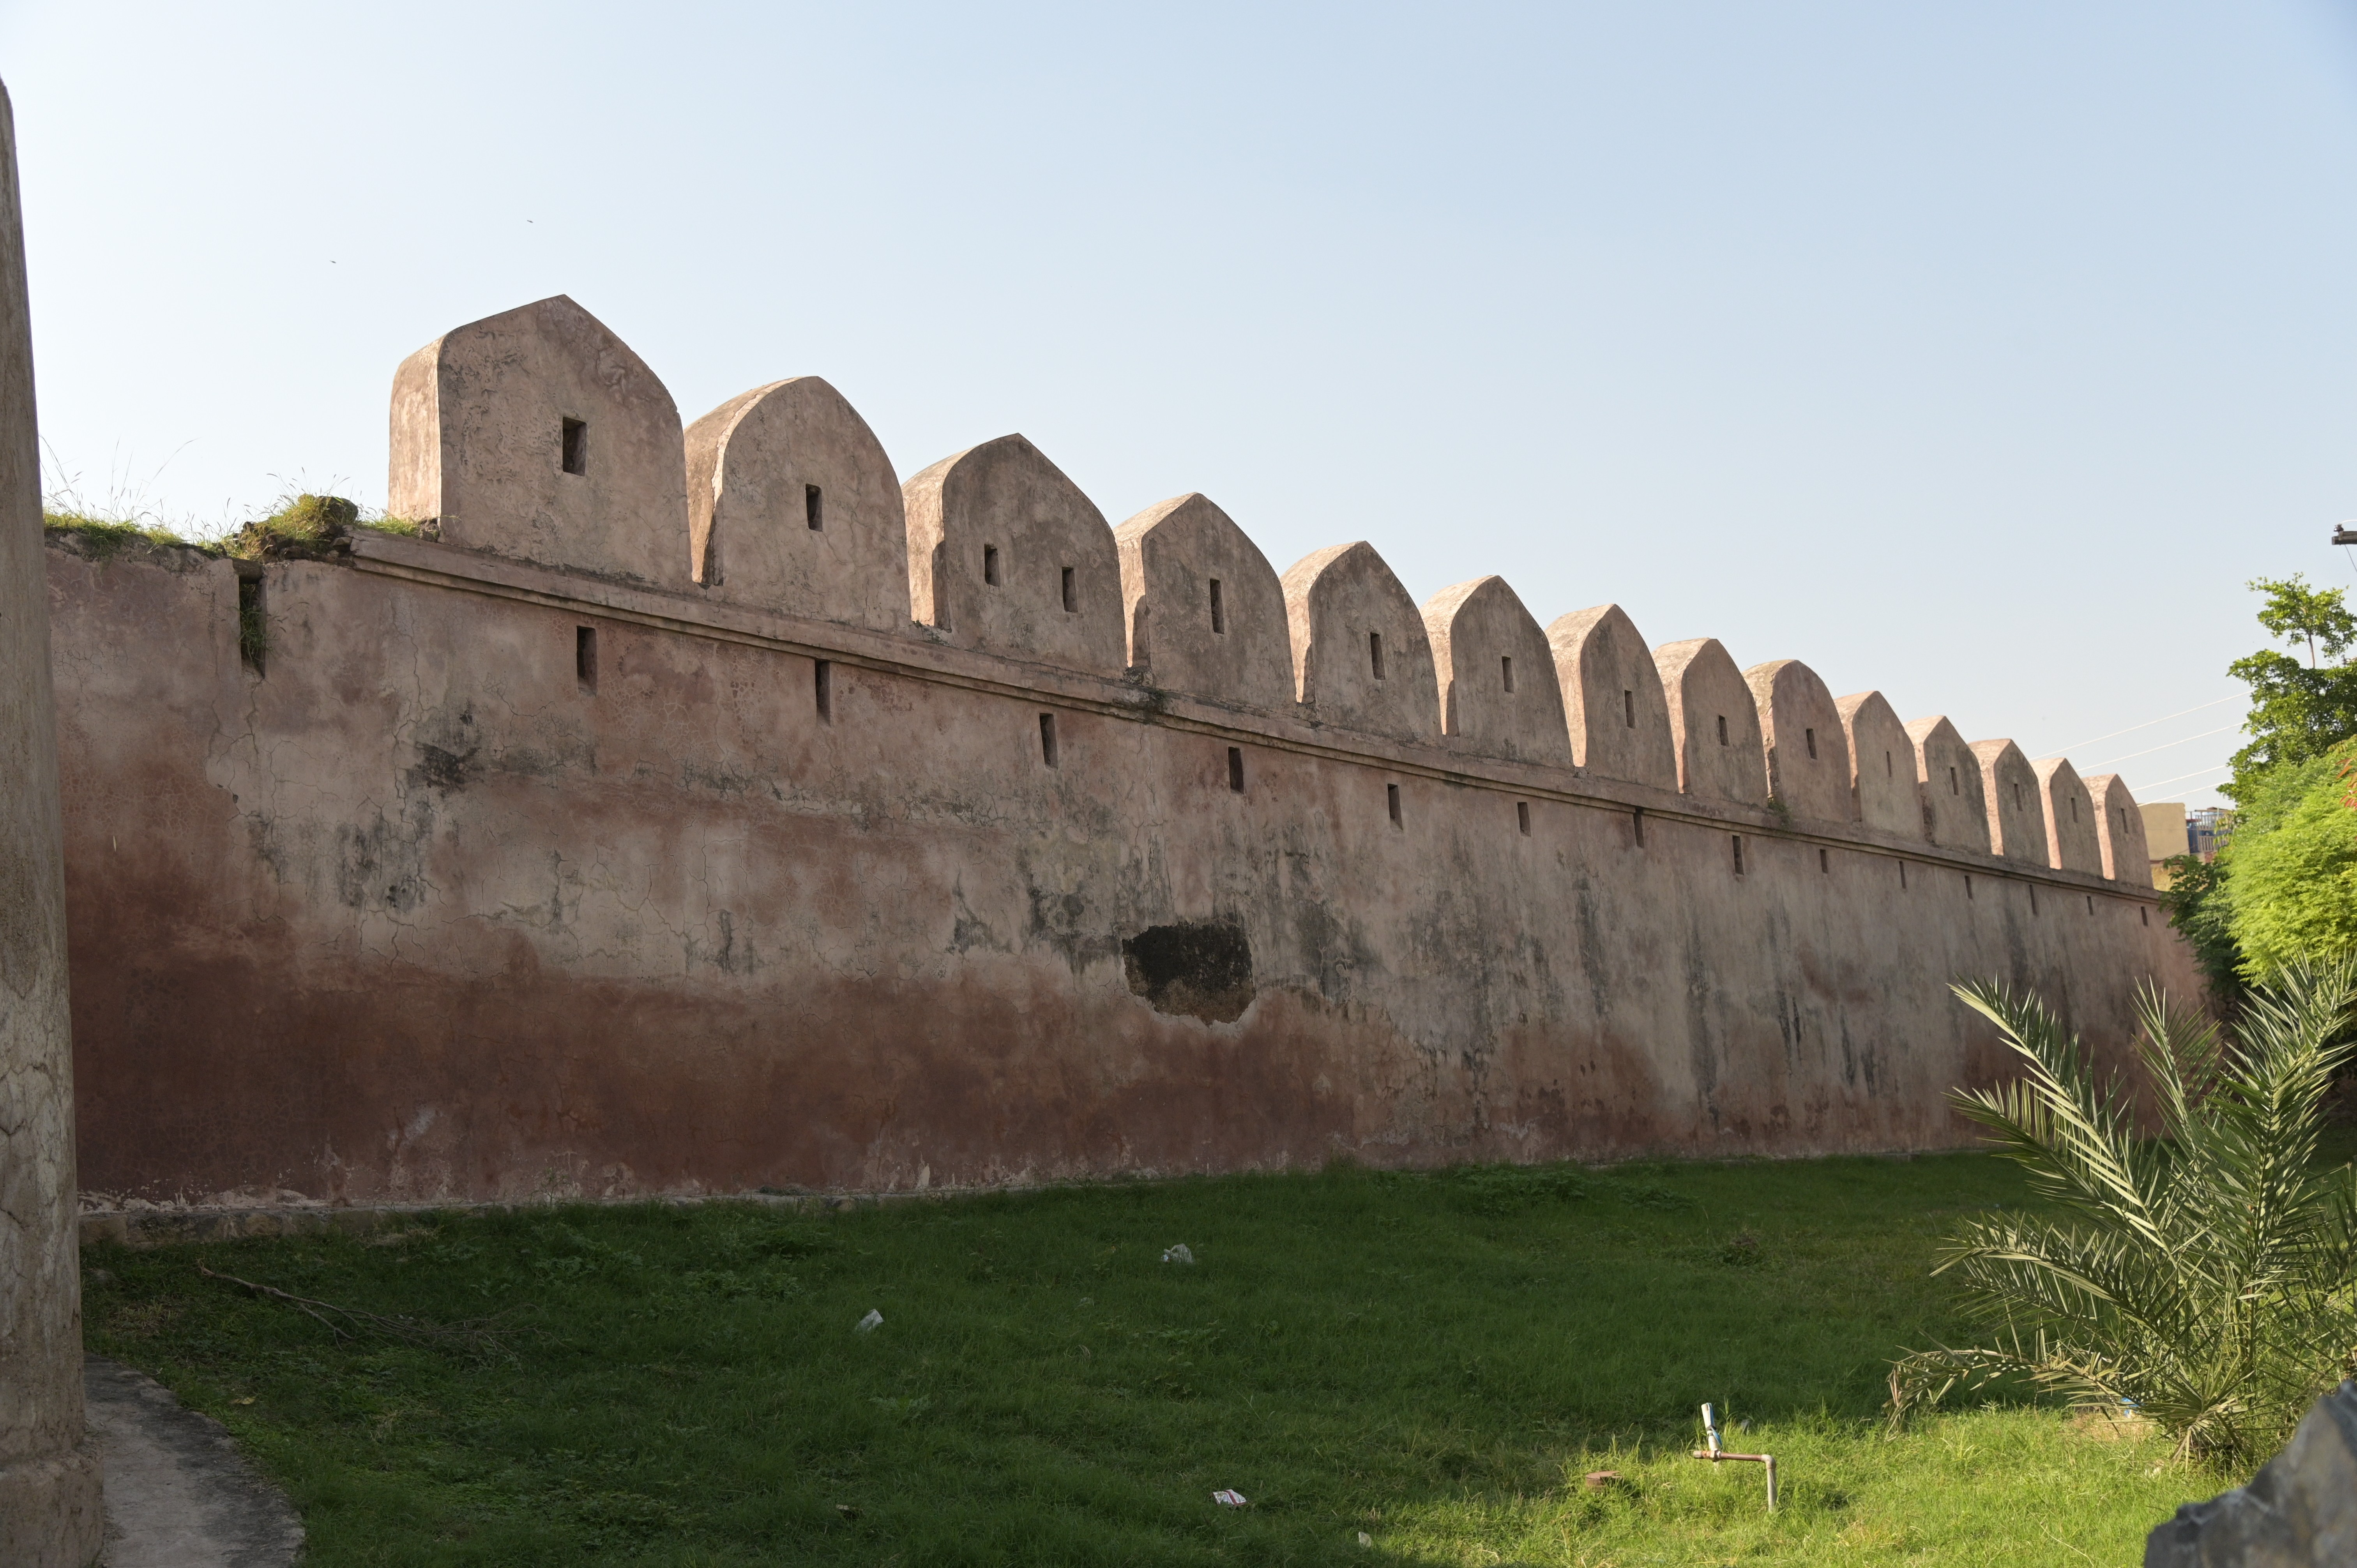 The exterior wall of Rawat Fort